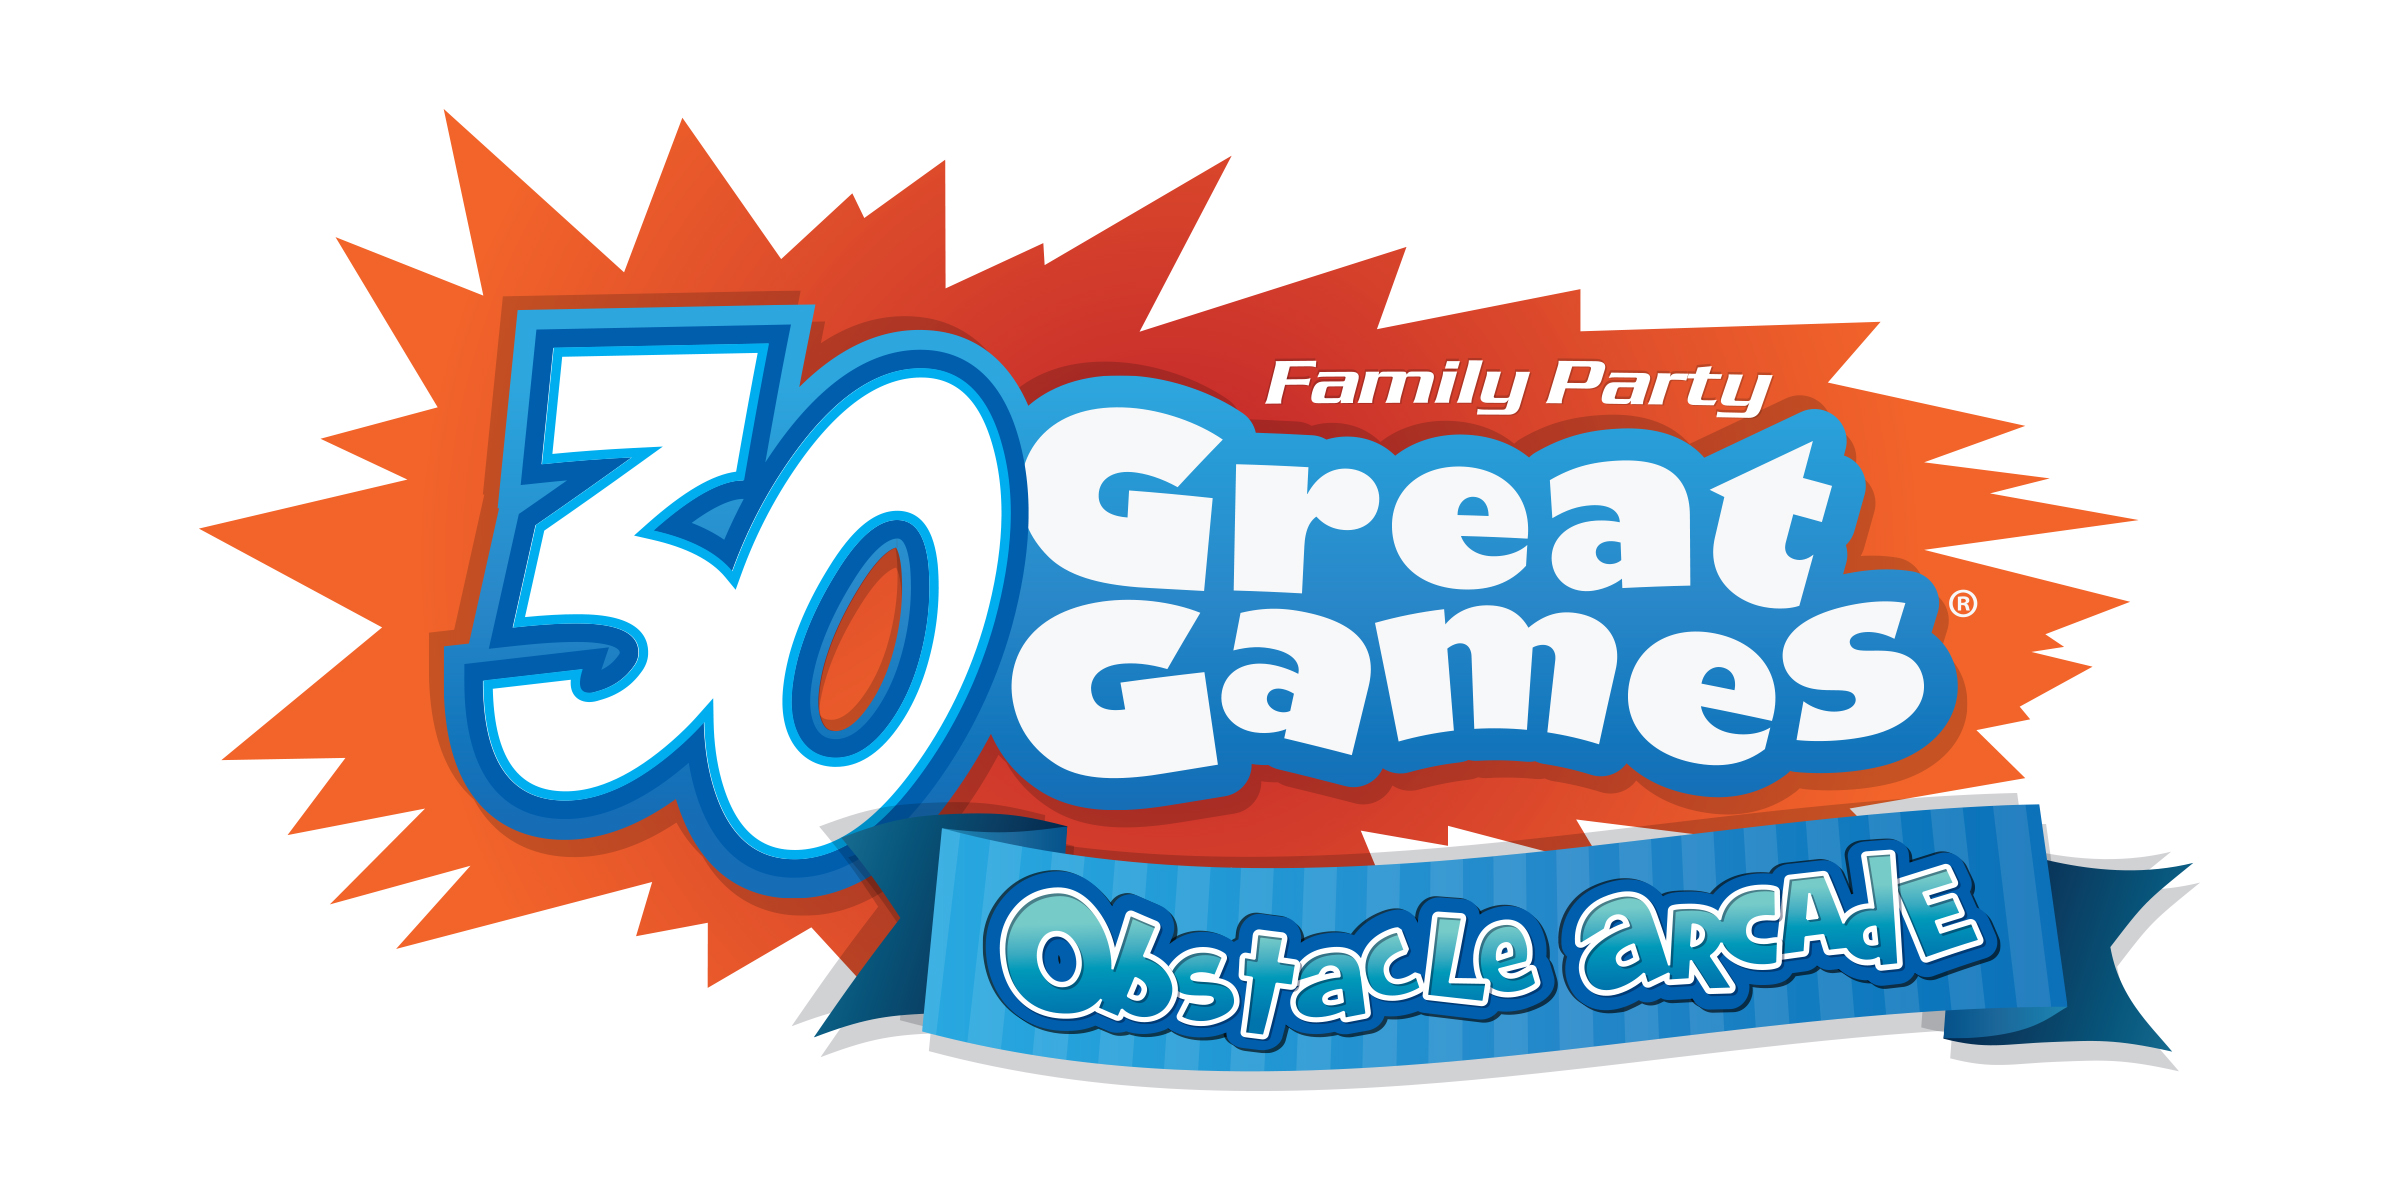 Family Party: 30 Great Games: Obstacle Arcade Box Art And Screens